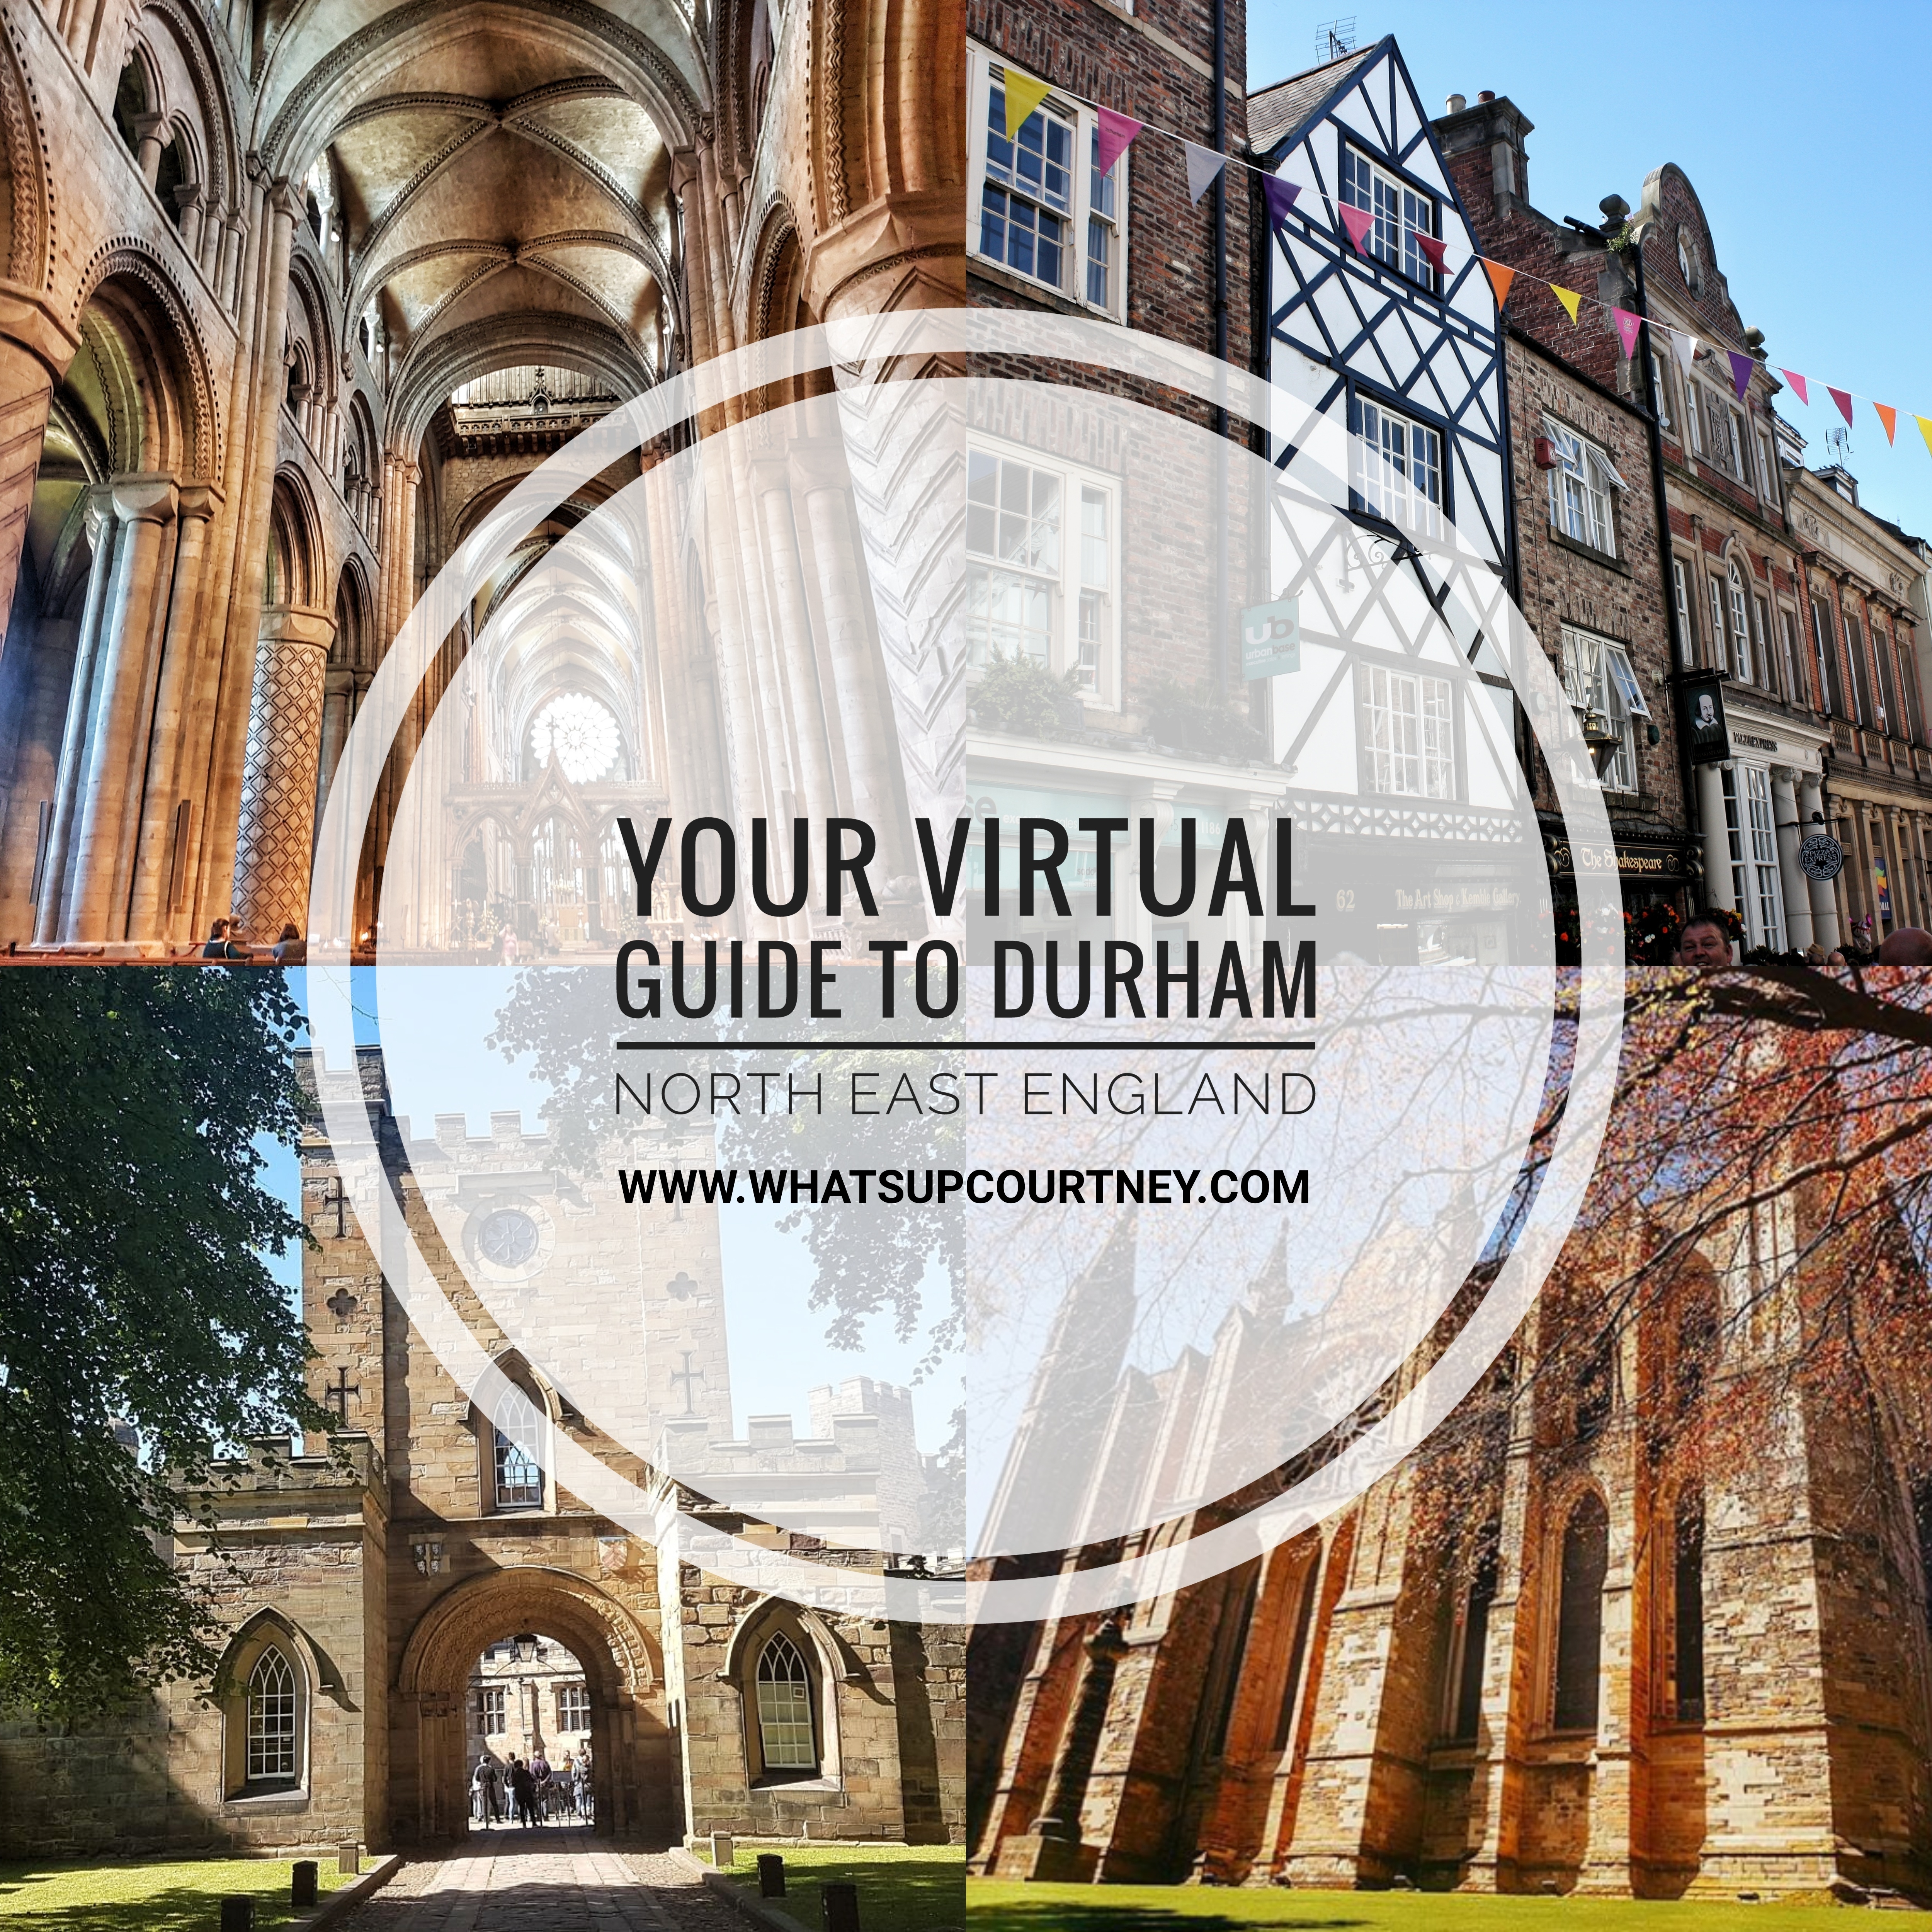 Your virtual guide to exploring the city of Durham UK . Come have a look! >>www.whatsupcourtney.com